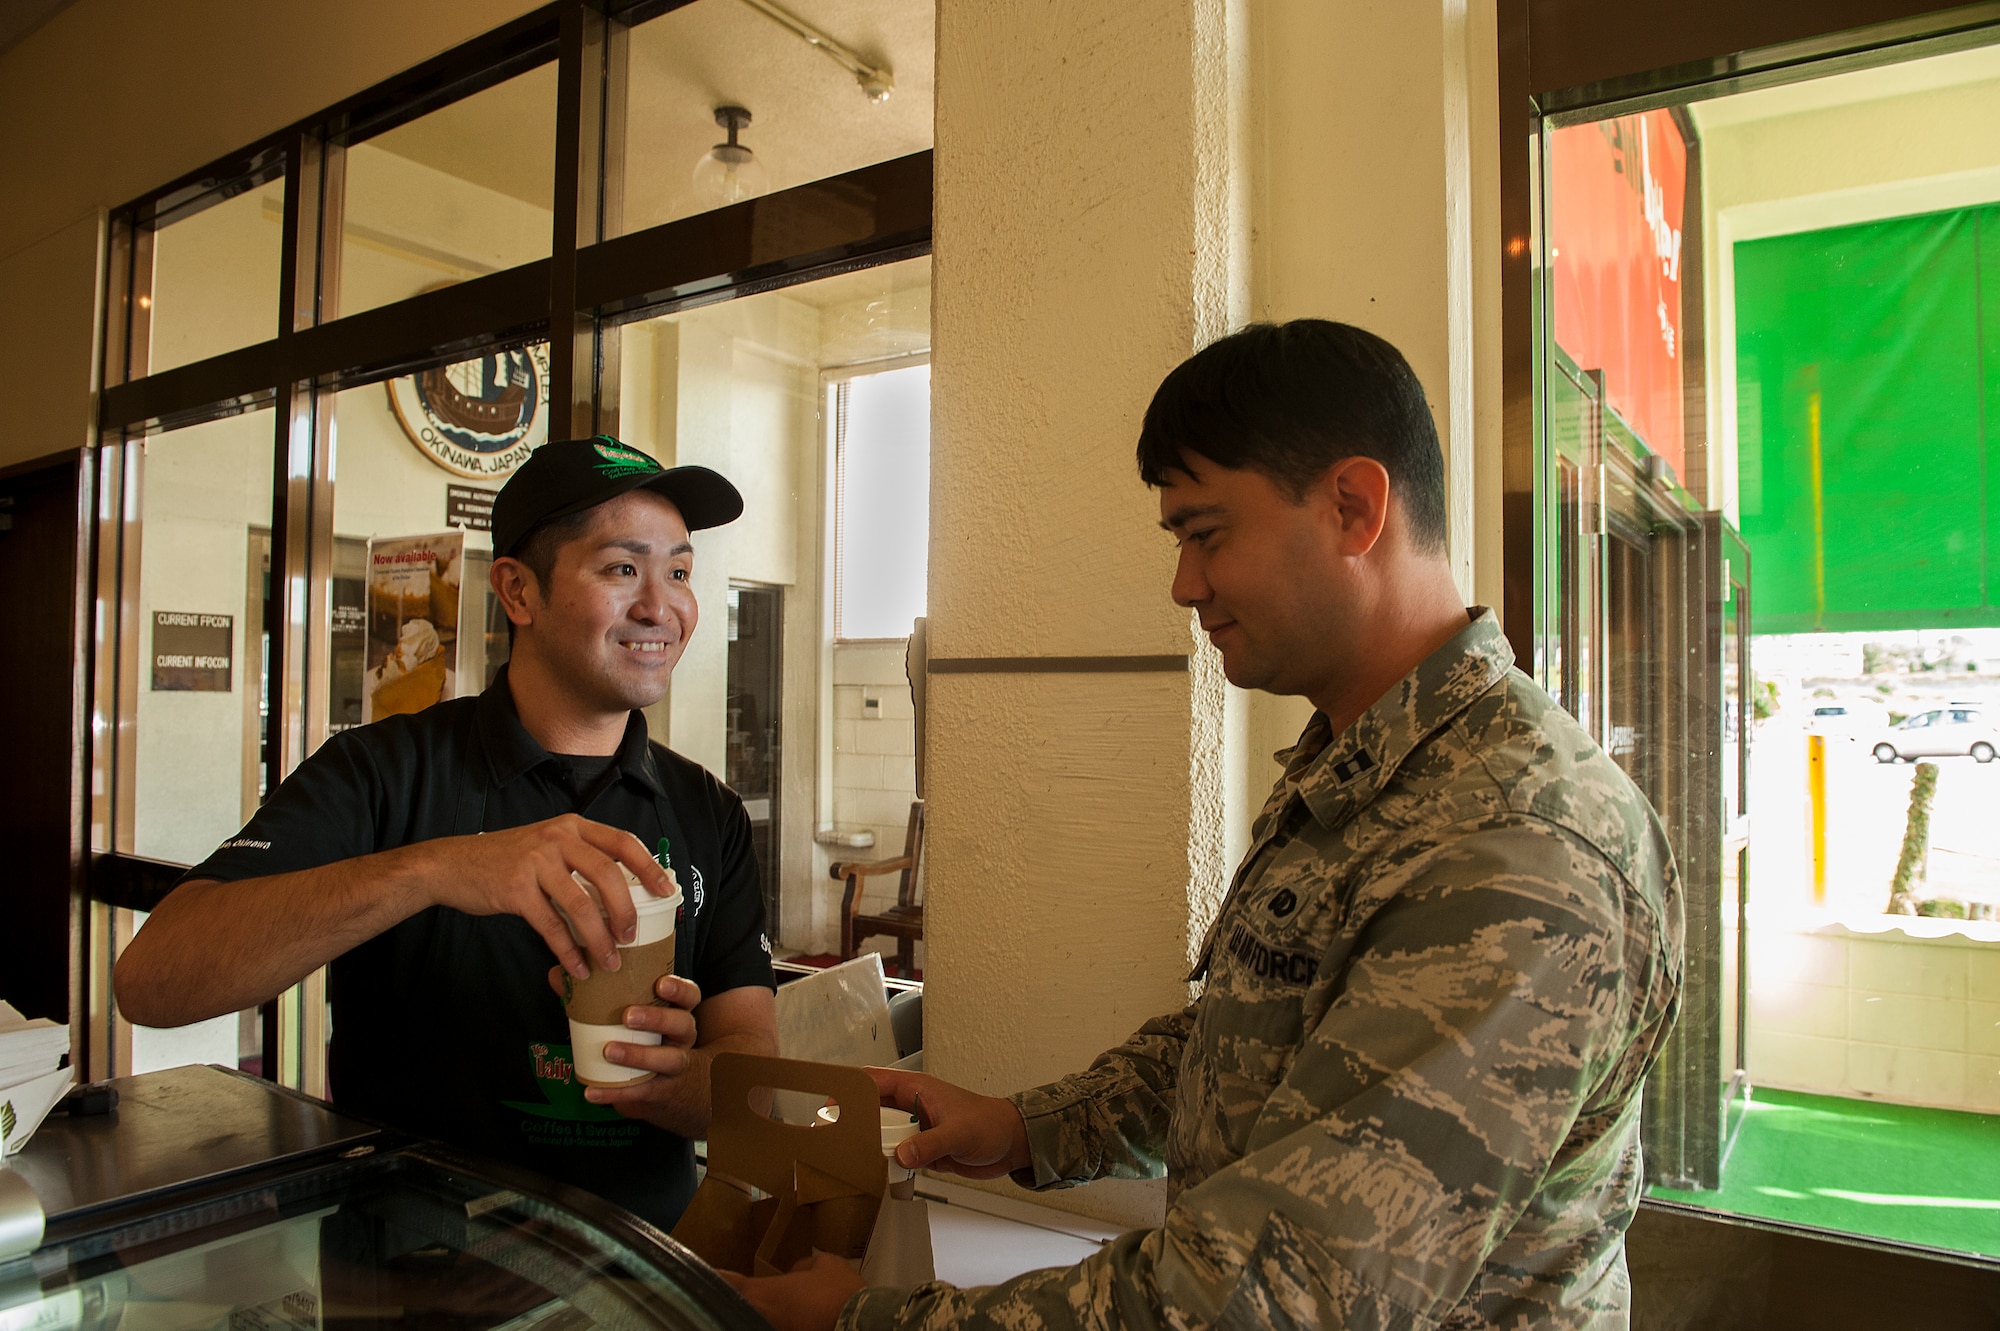 U.S. Air Force Capt. Joshua Caragan, 18th Wing equal opportunity officer, gets coffee from Koji Kamekawa, Daily Grind Coffee Shop cashier, in the Rocker NCO Club, Dec. 30, 2015, at Kadena Air Base, Japan. The Rocker NCO Club is closing its doors to make way for a brand new facility coming in 2017. (U.S. Air Force photo by Airman 1st Class Corey M. Pettis) 